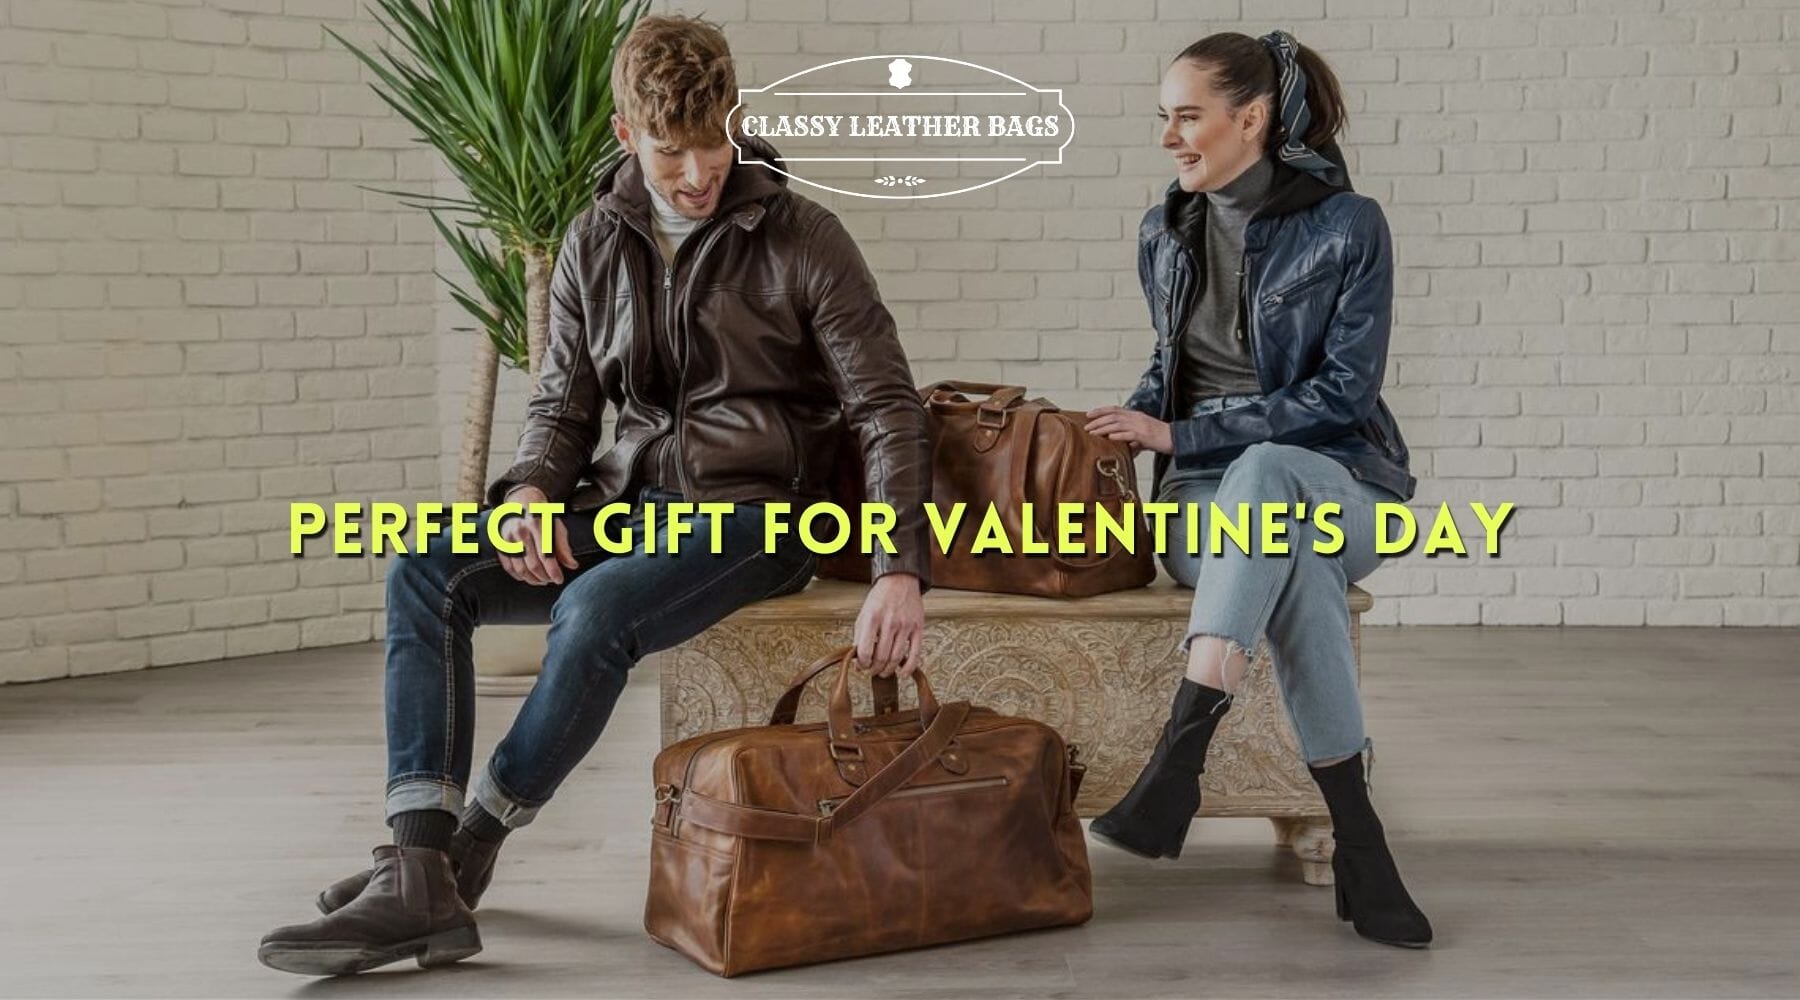 Leather Bags and Accessories – The Perfect Gift This Valentine’s Day